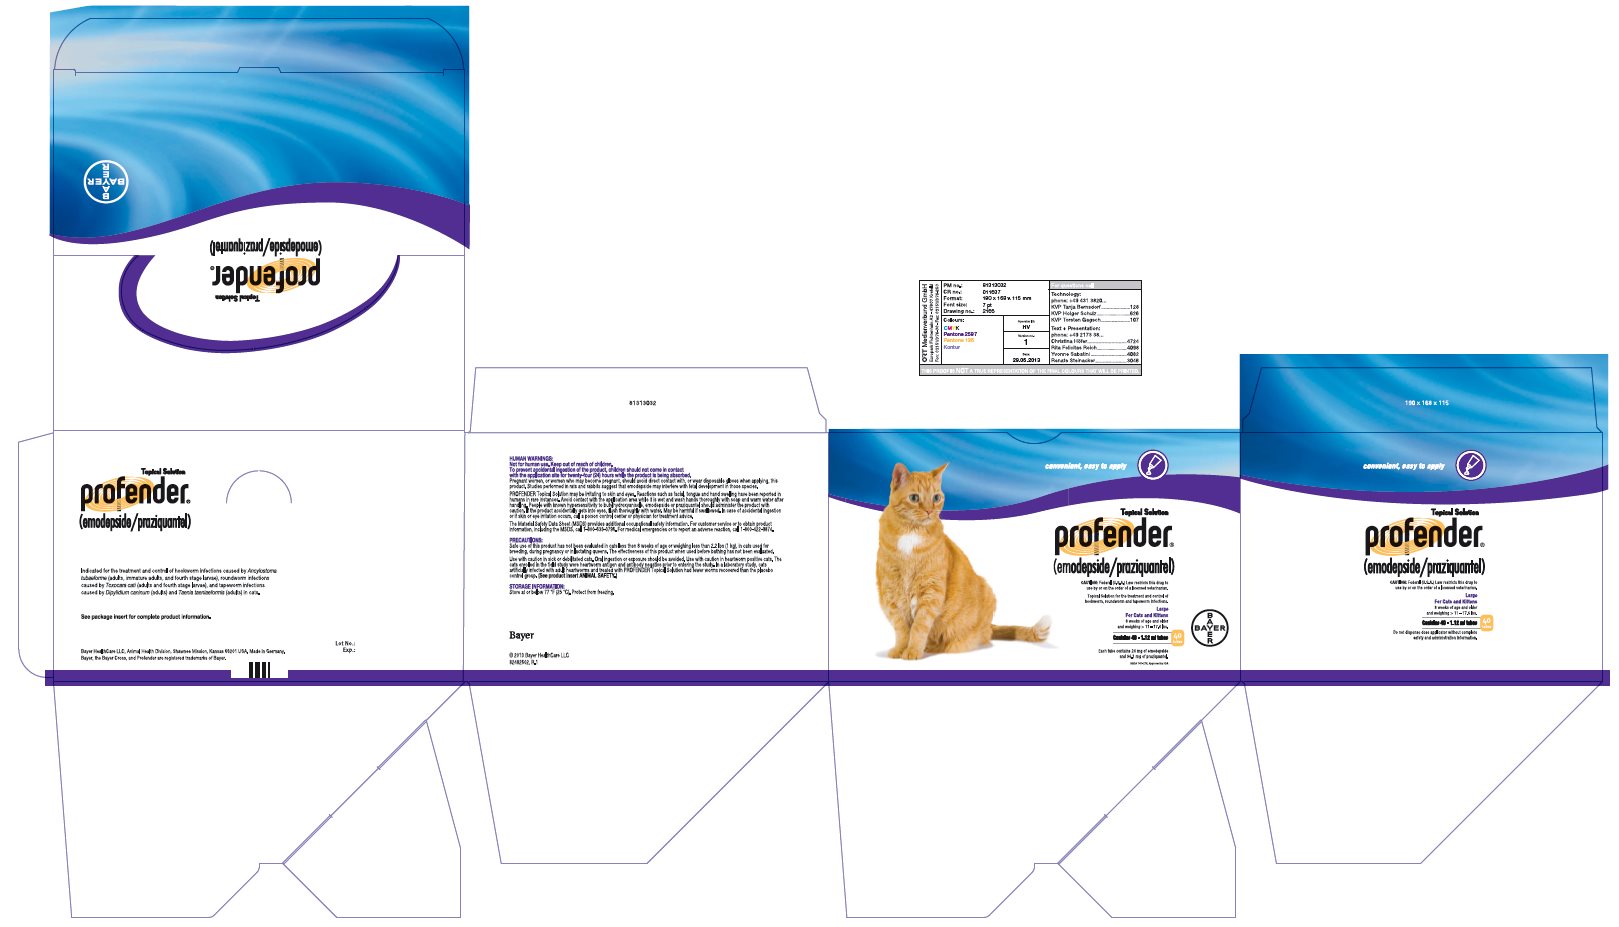 Profender (emodepside/praziquantel) Topical Solution for large cats and kittens (> 11 - 17.6 lbs) 40 (1.12 ml) tubes label